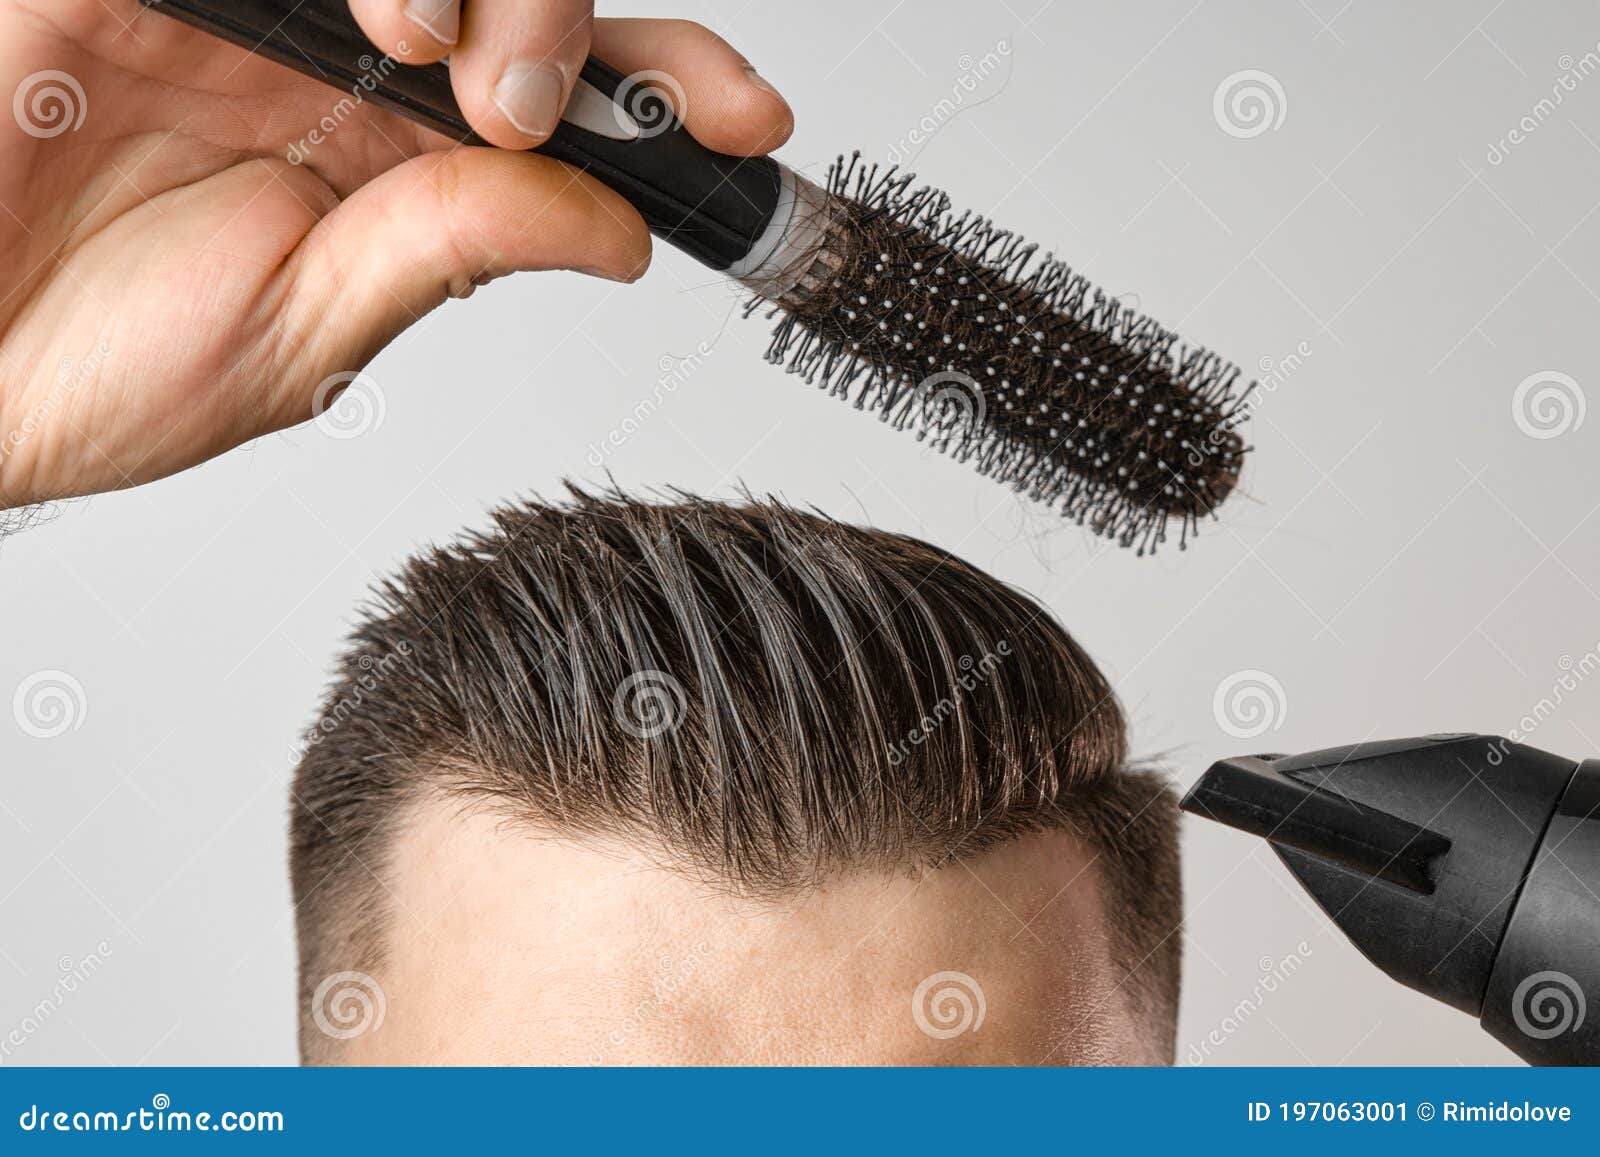 Man Styling His Hair with Hair Dryer and Round Brush. Hair Care at Home  after Barbershop Stock Image - Image of brushing, grooming: 197063001